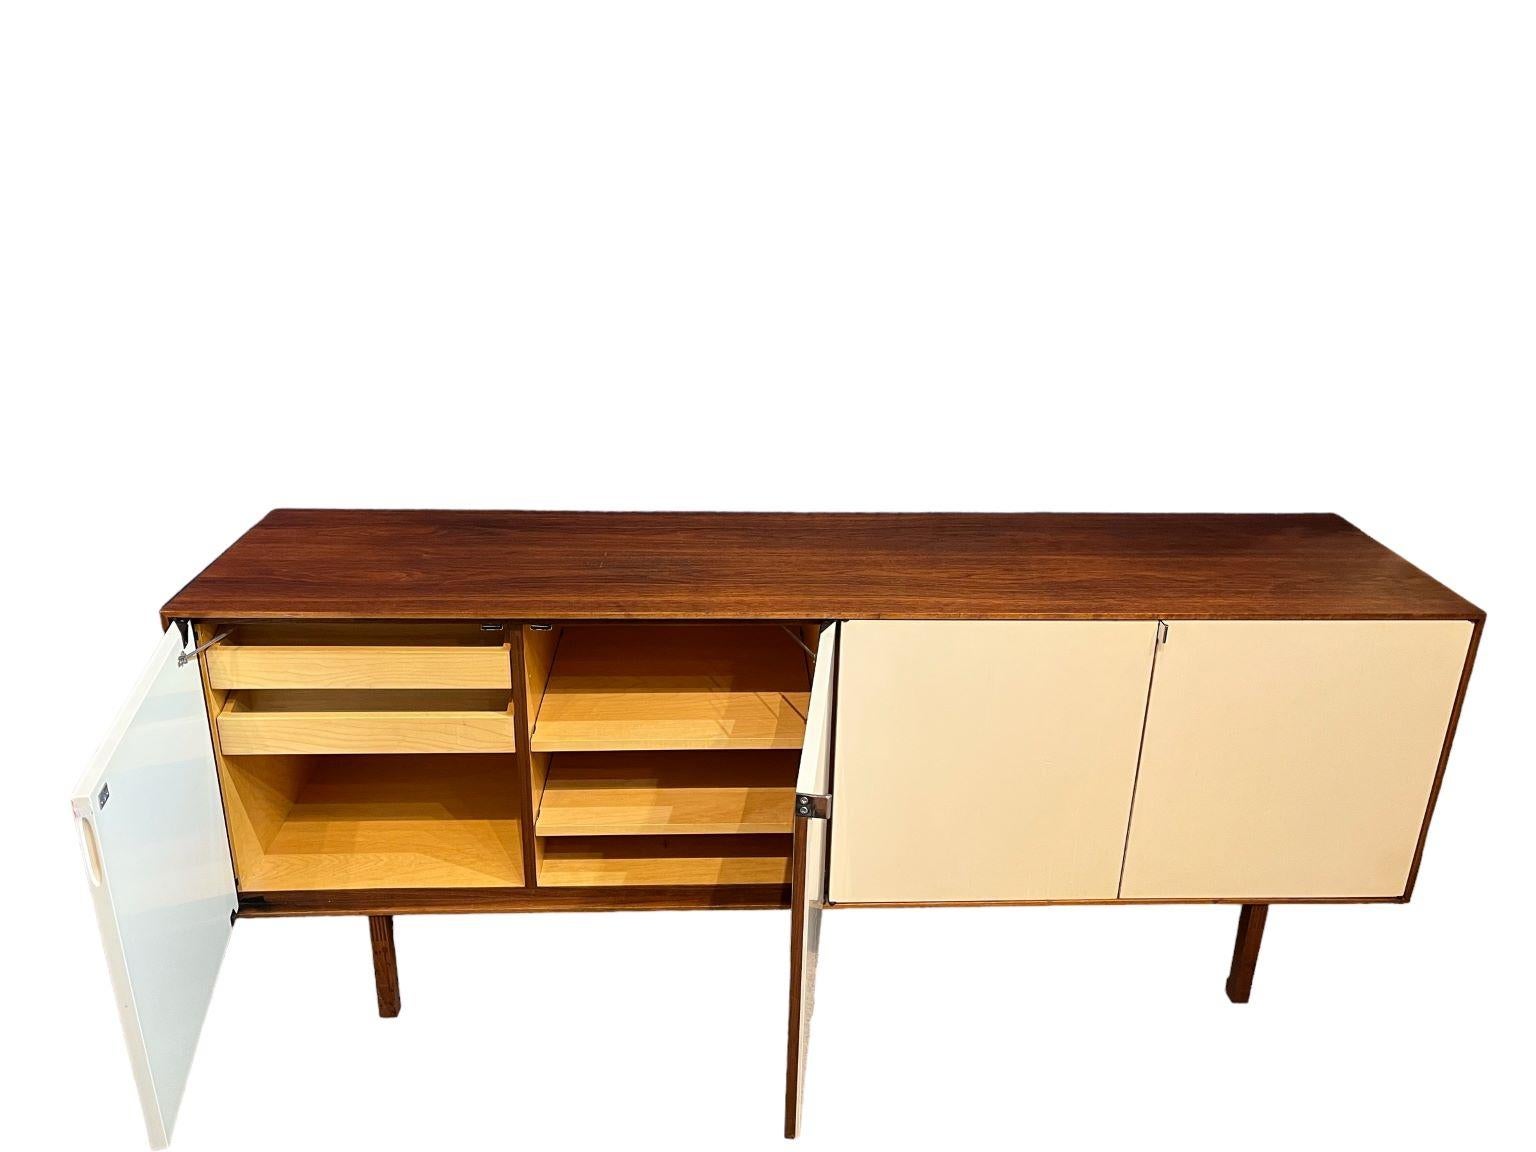 Early Florance Knoll For Knoll Associates Walnut And Cream Credenza C.1950 For Sale 3